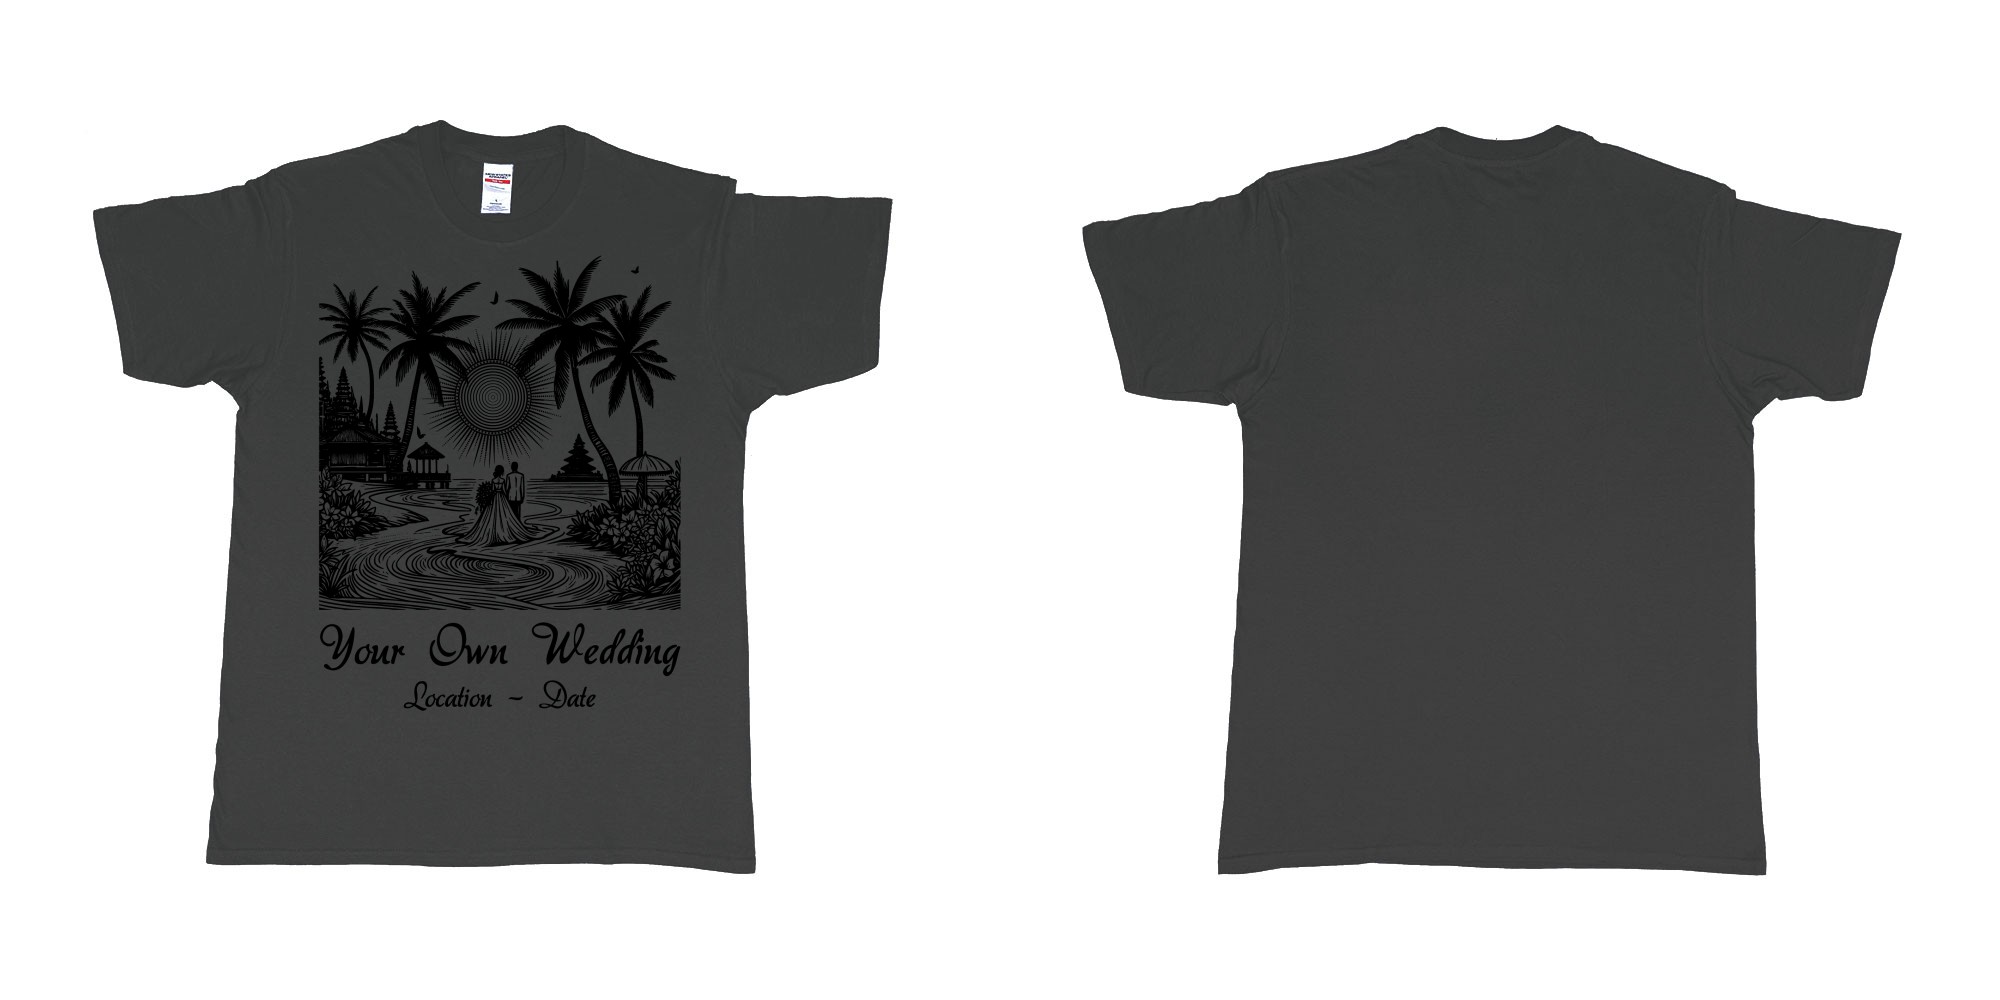 Custom tshirt design wedding couple drawing bali beach sea sunset custom printing souvenir gift in fabric color black choice your own text made in Bali by The Pirate Way